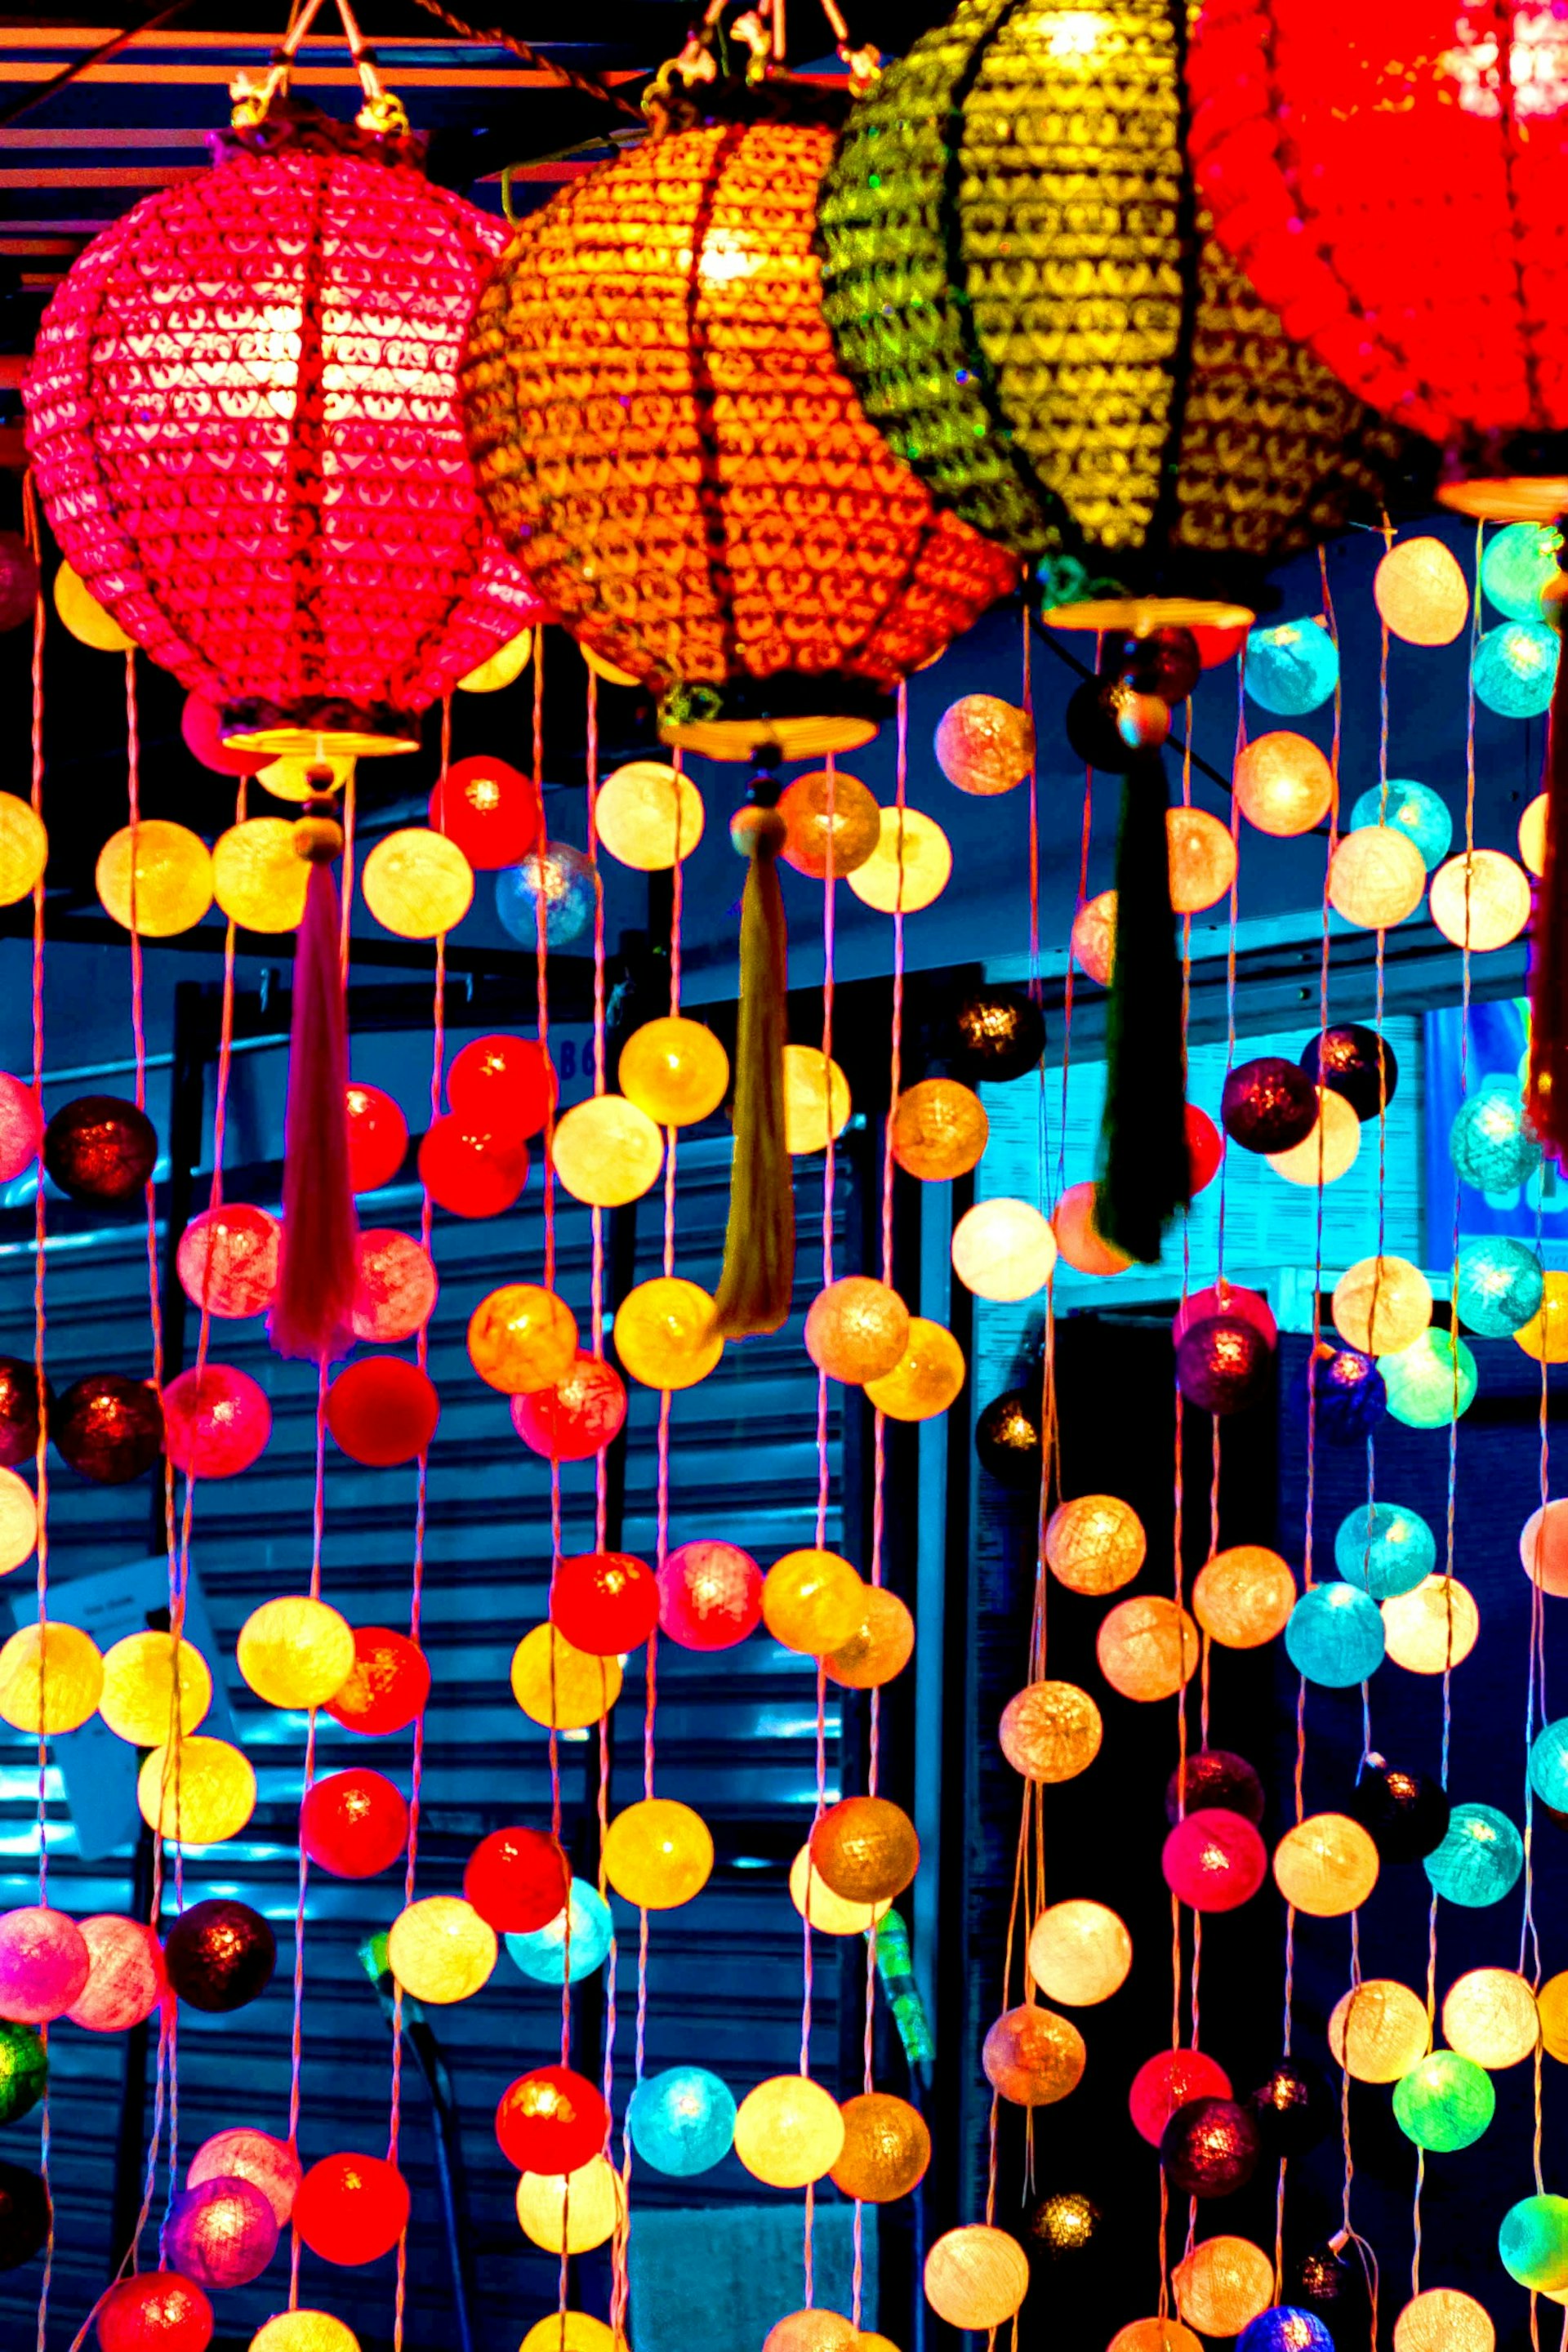 Colorful lights on display at a night bazaar in Chiang Mai, Thailand © Gabriel Perez / Getty Images